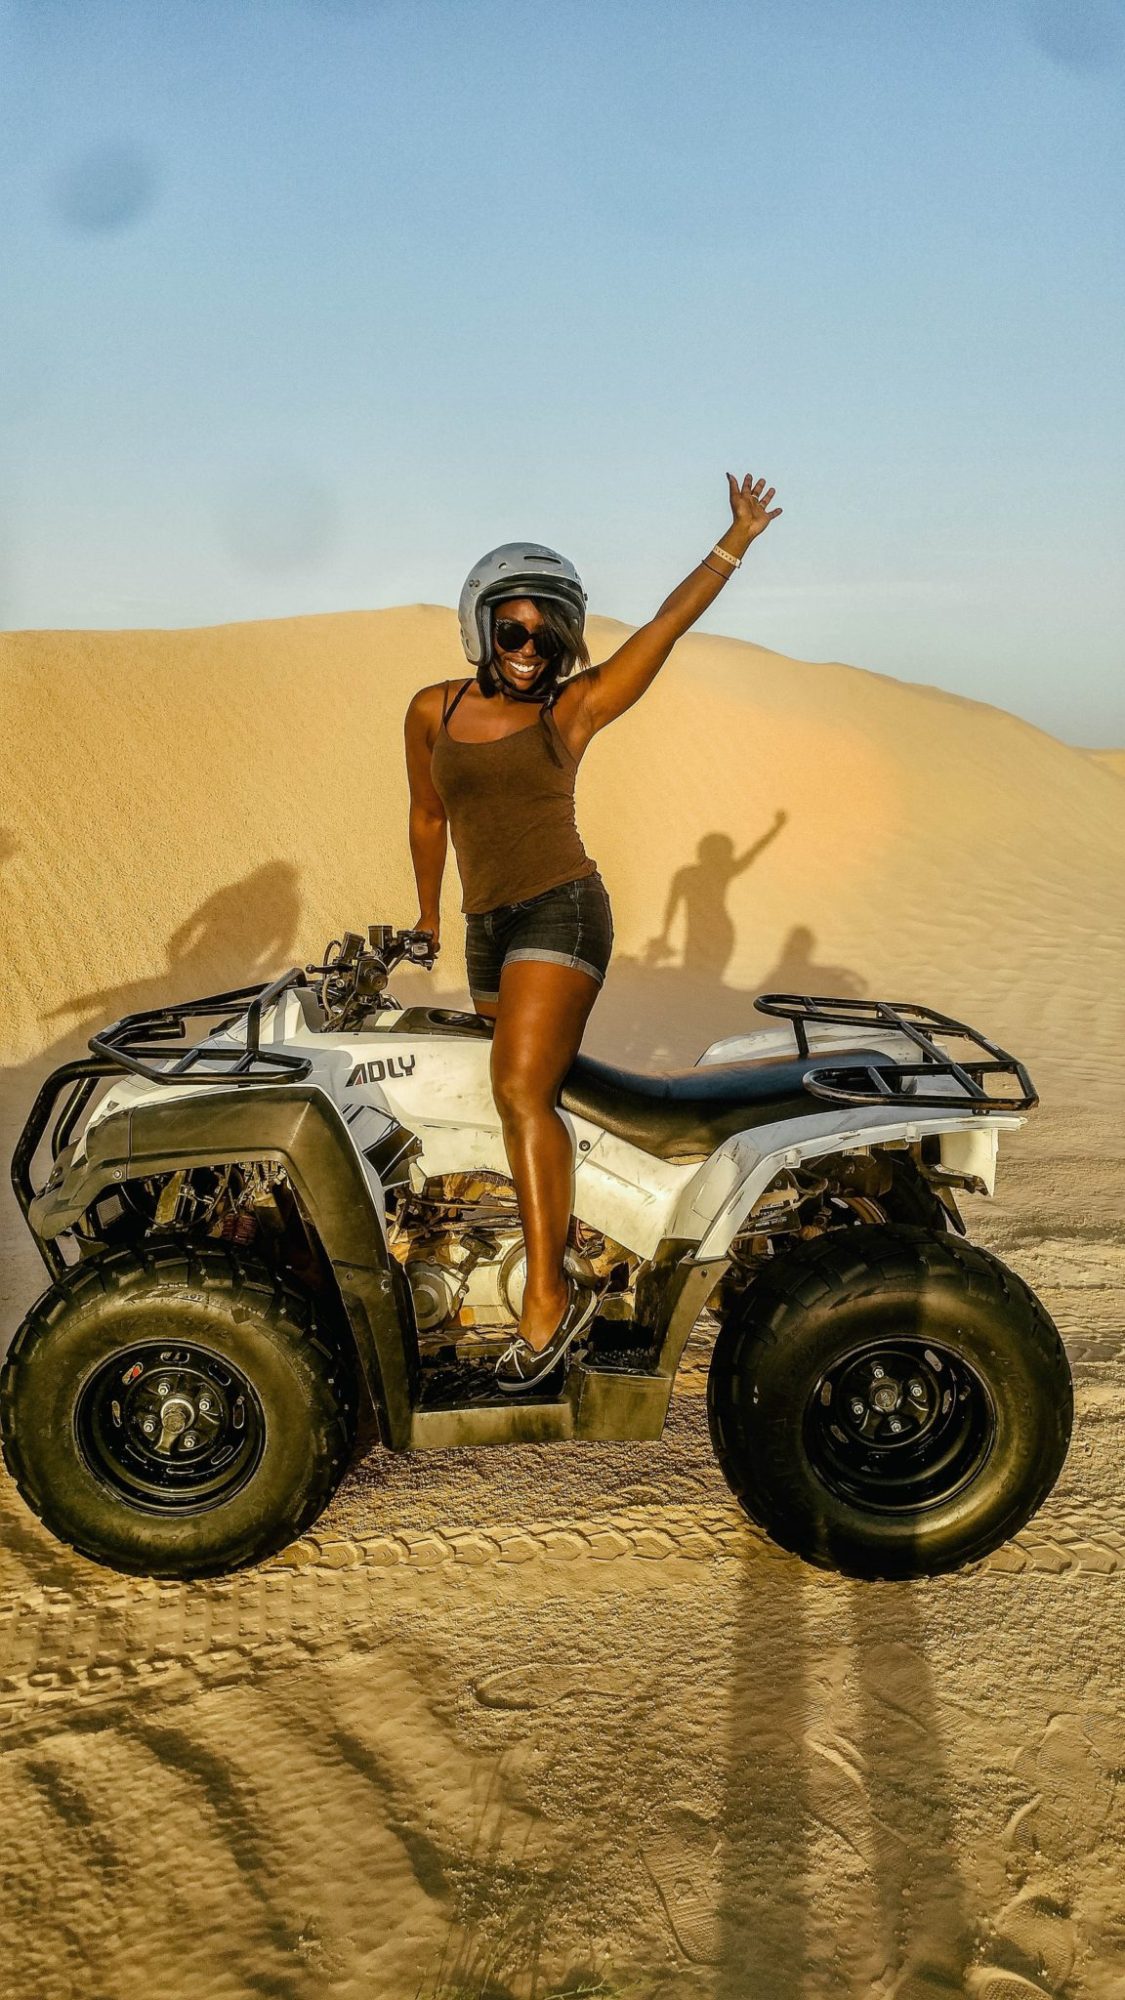 Riding the quad bikes over the sand dunes was the best and most fun experience